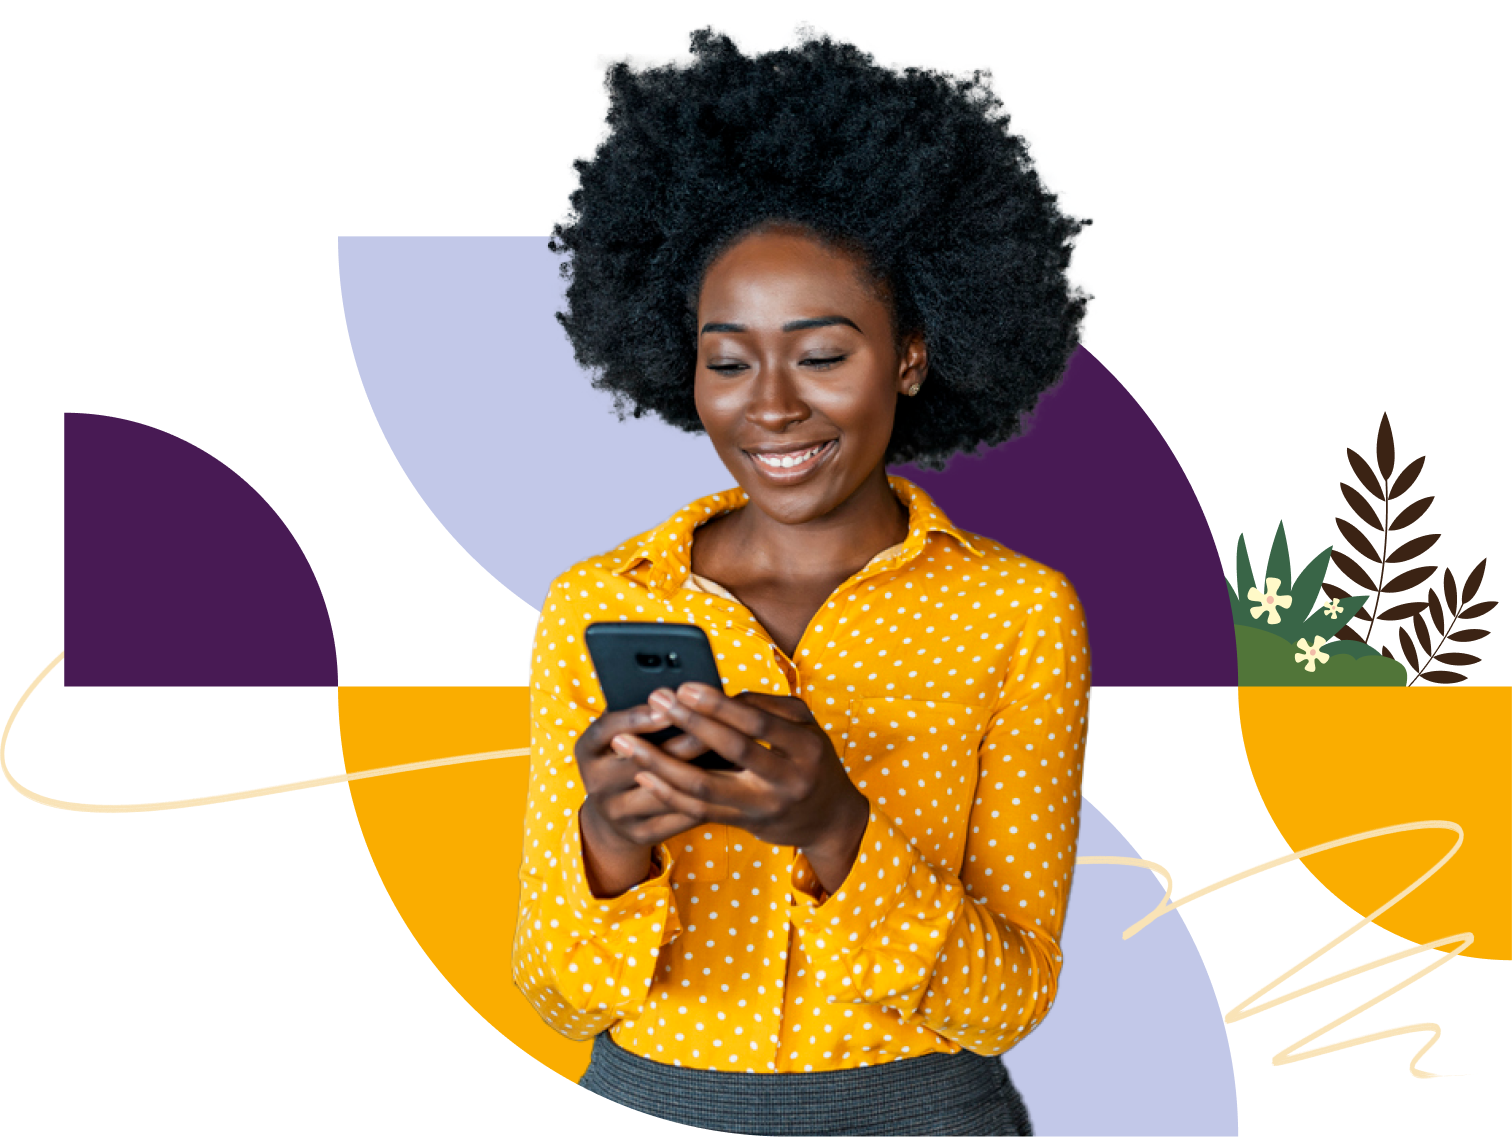 Woman smiling while looking at smartphone